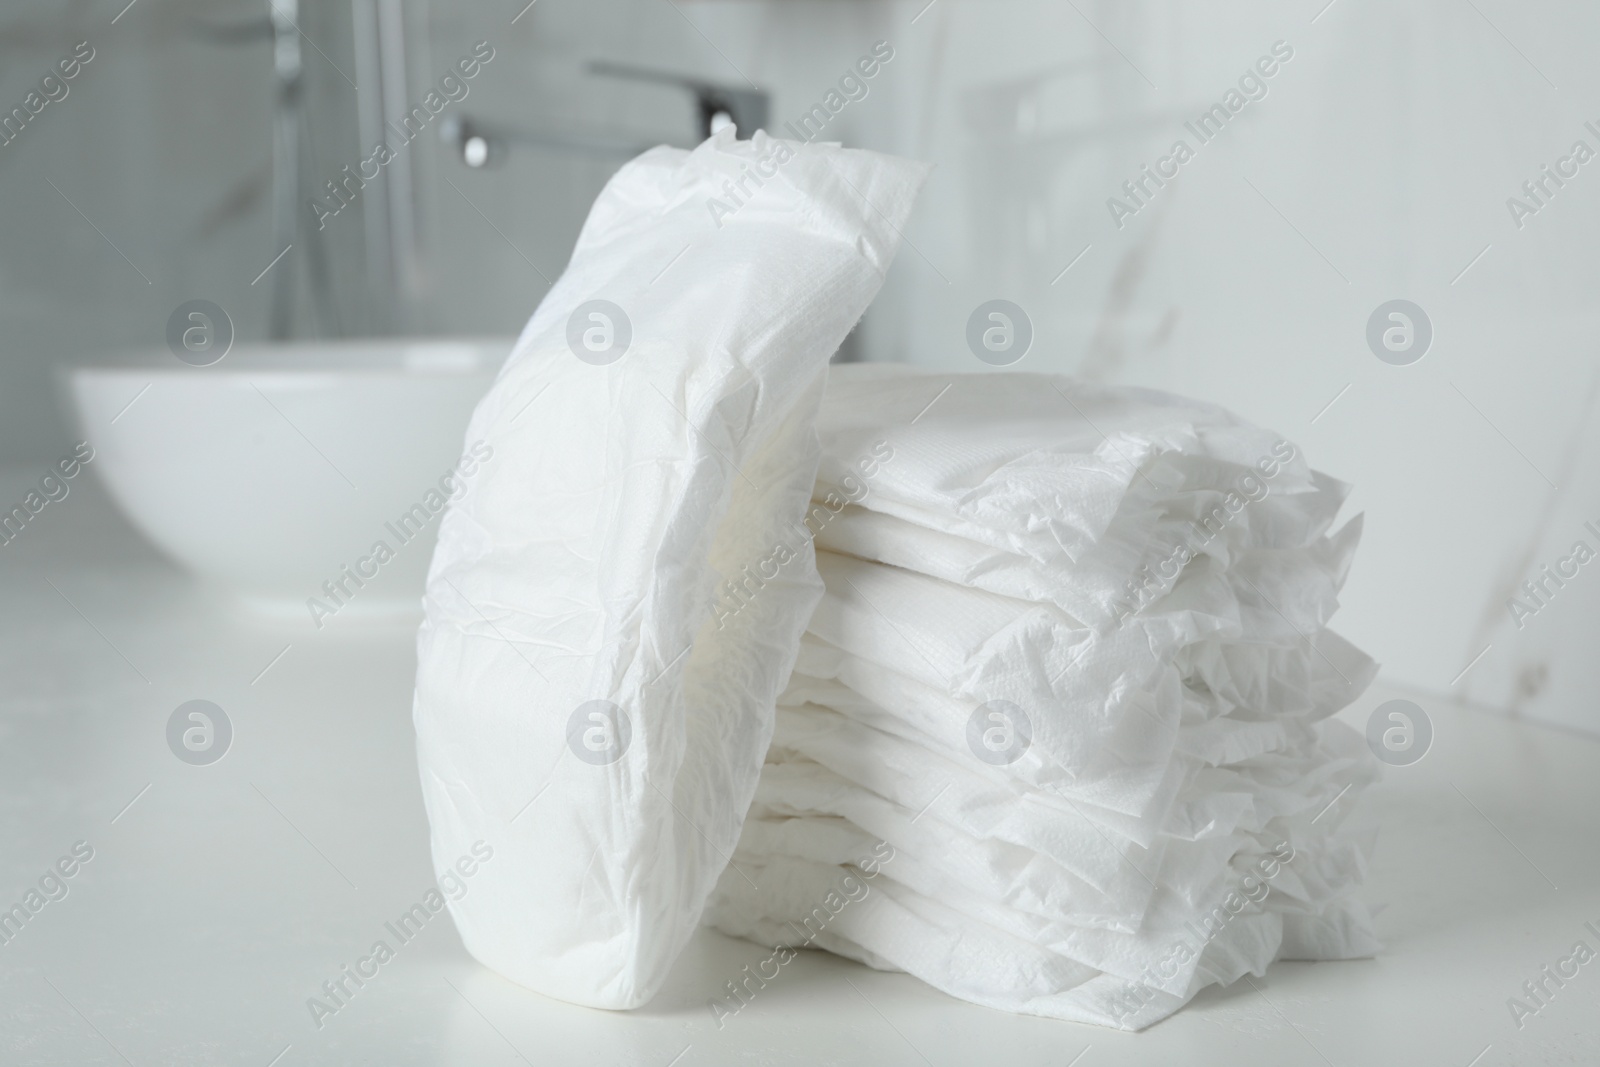 Photo of Stack of baby diapers on counter in bathroom